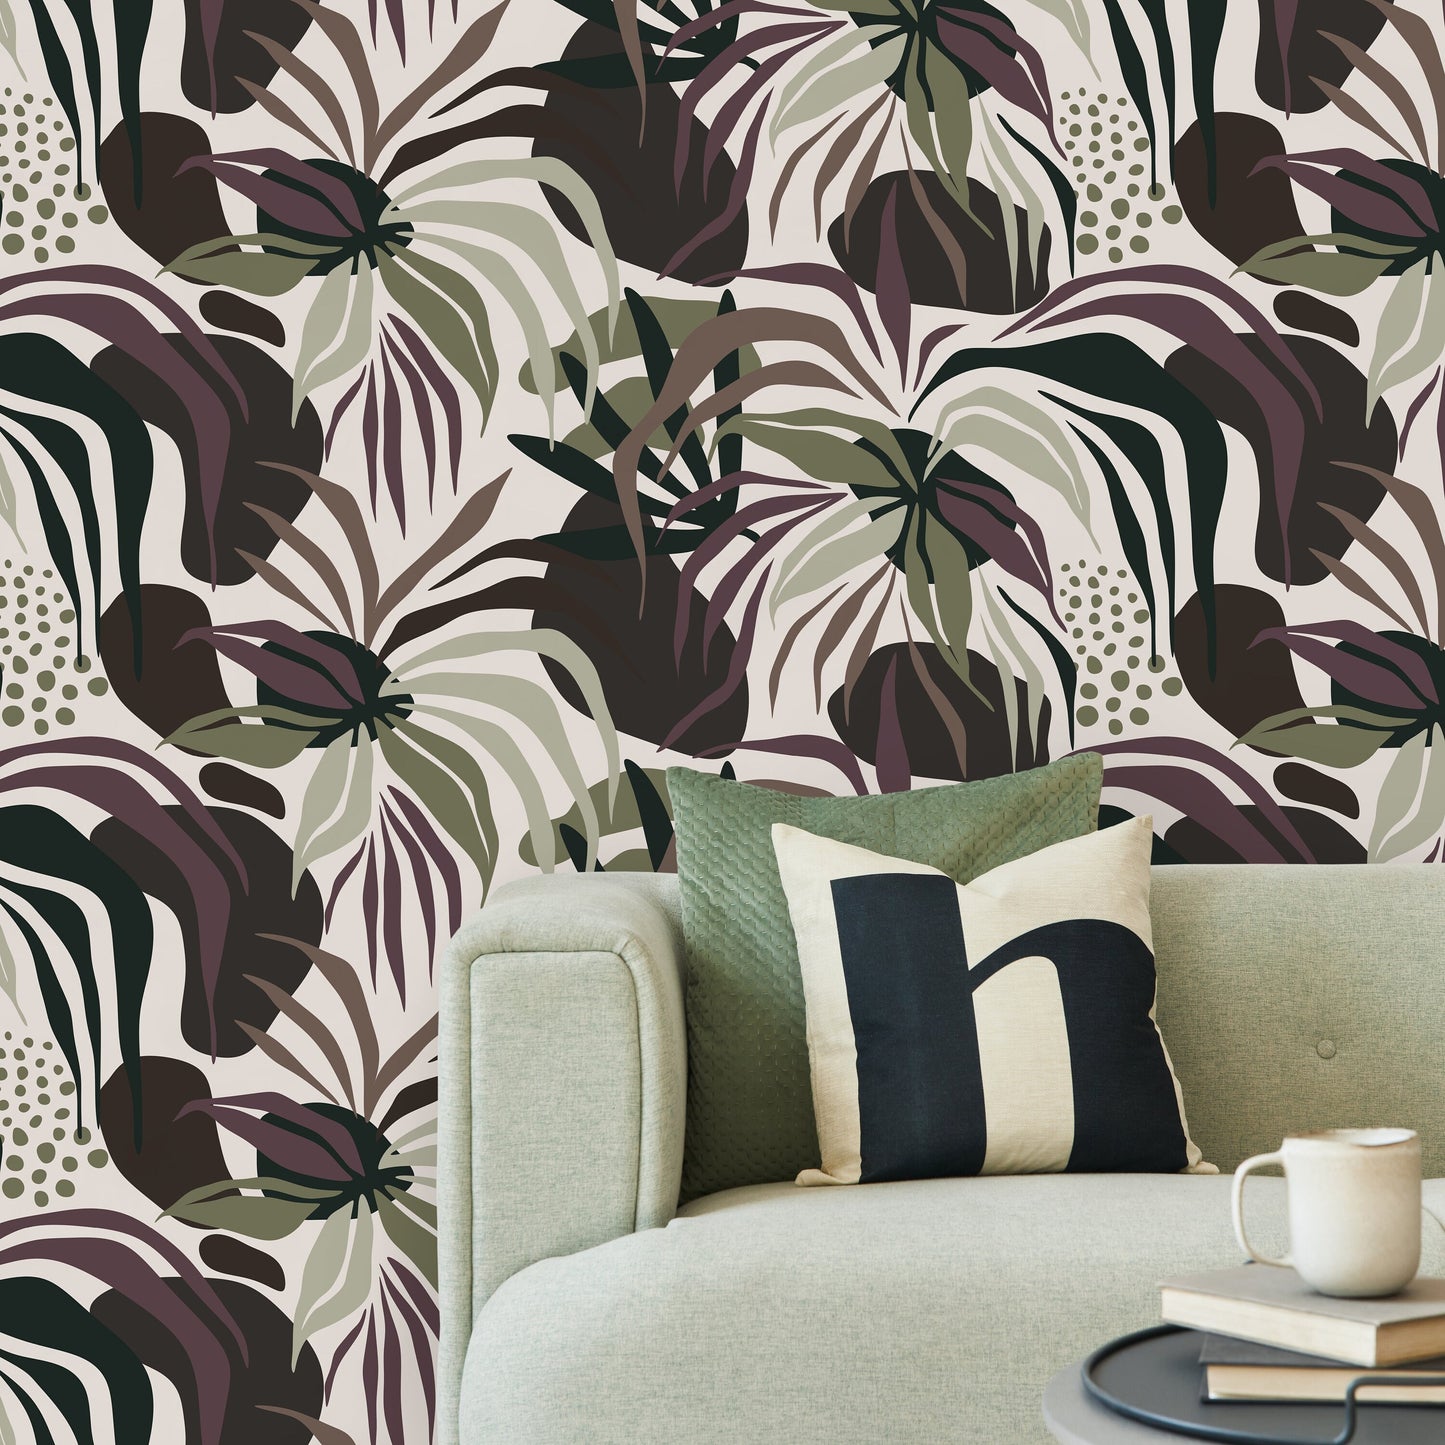 Dark Tropical Abstract Wallpaper Modern Wallpaper Peel and Stick and Traditional Wallpaper - D713